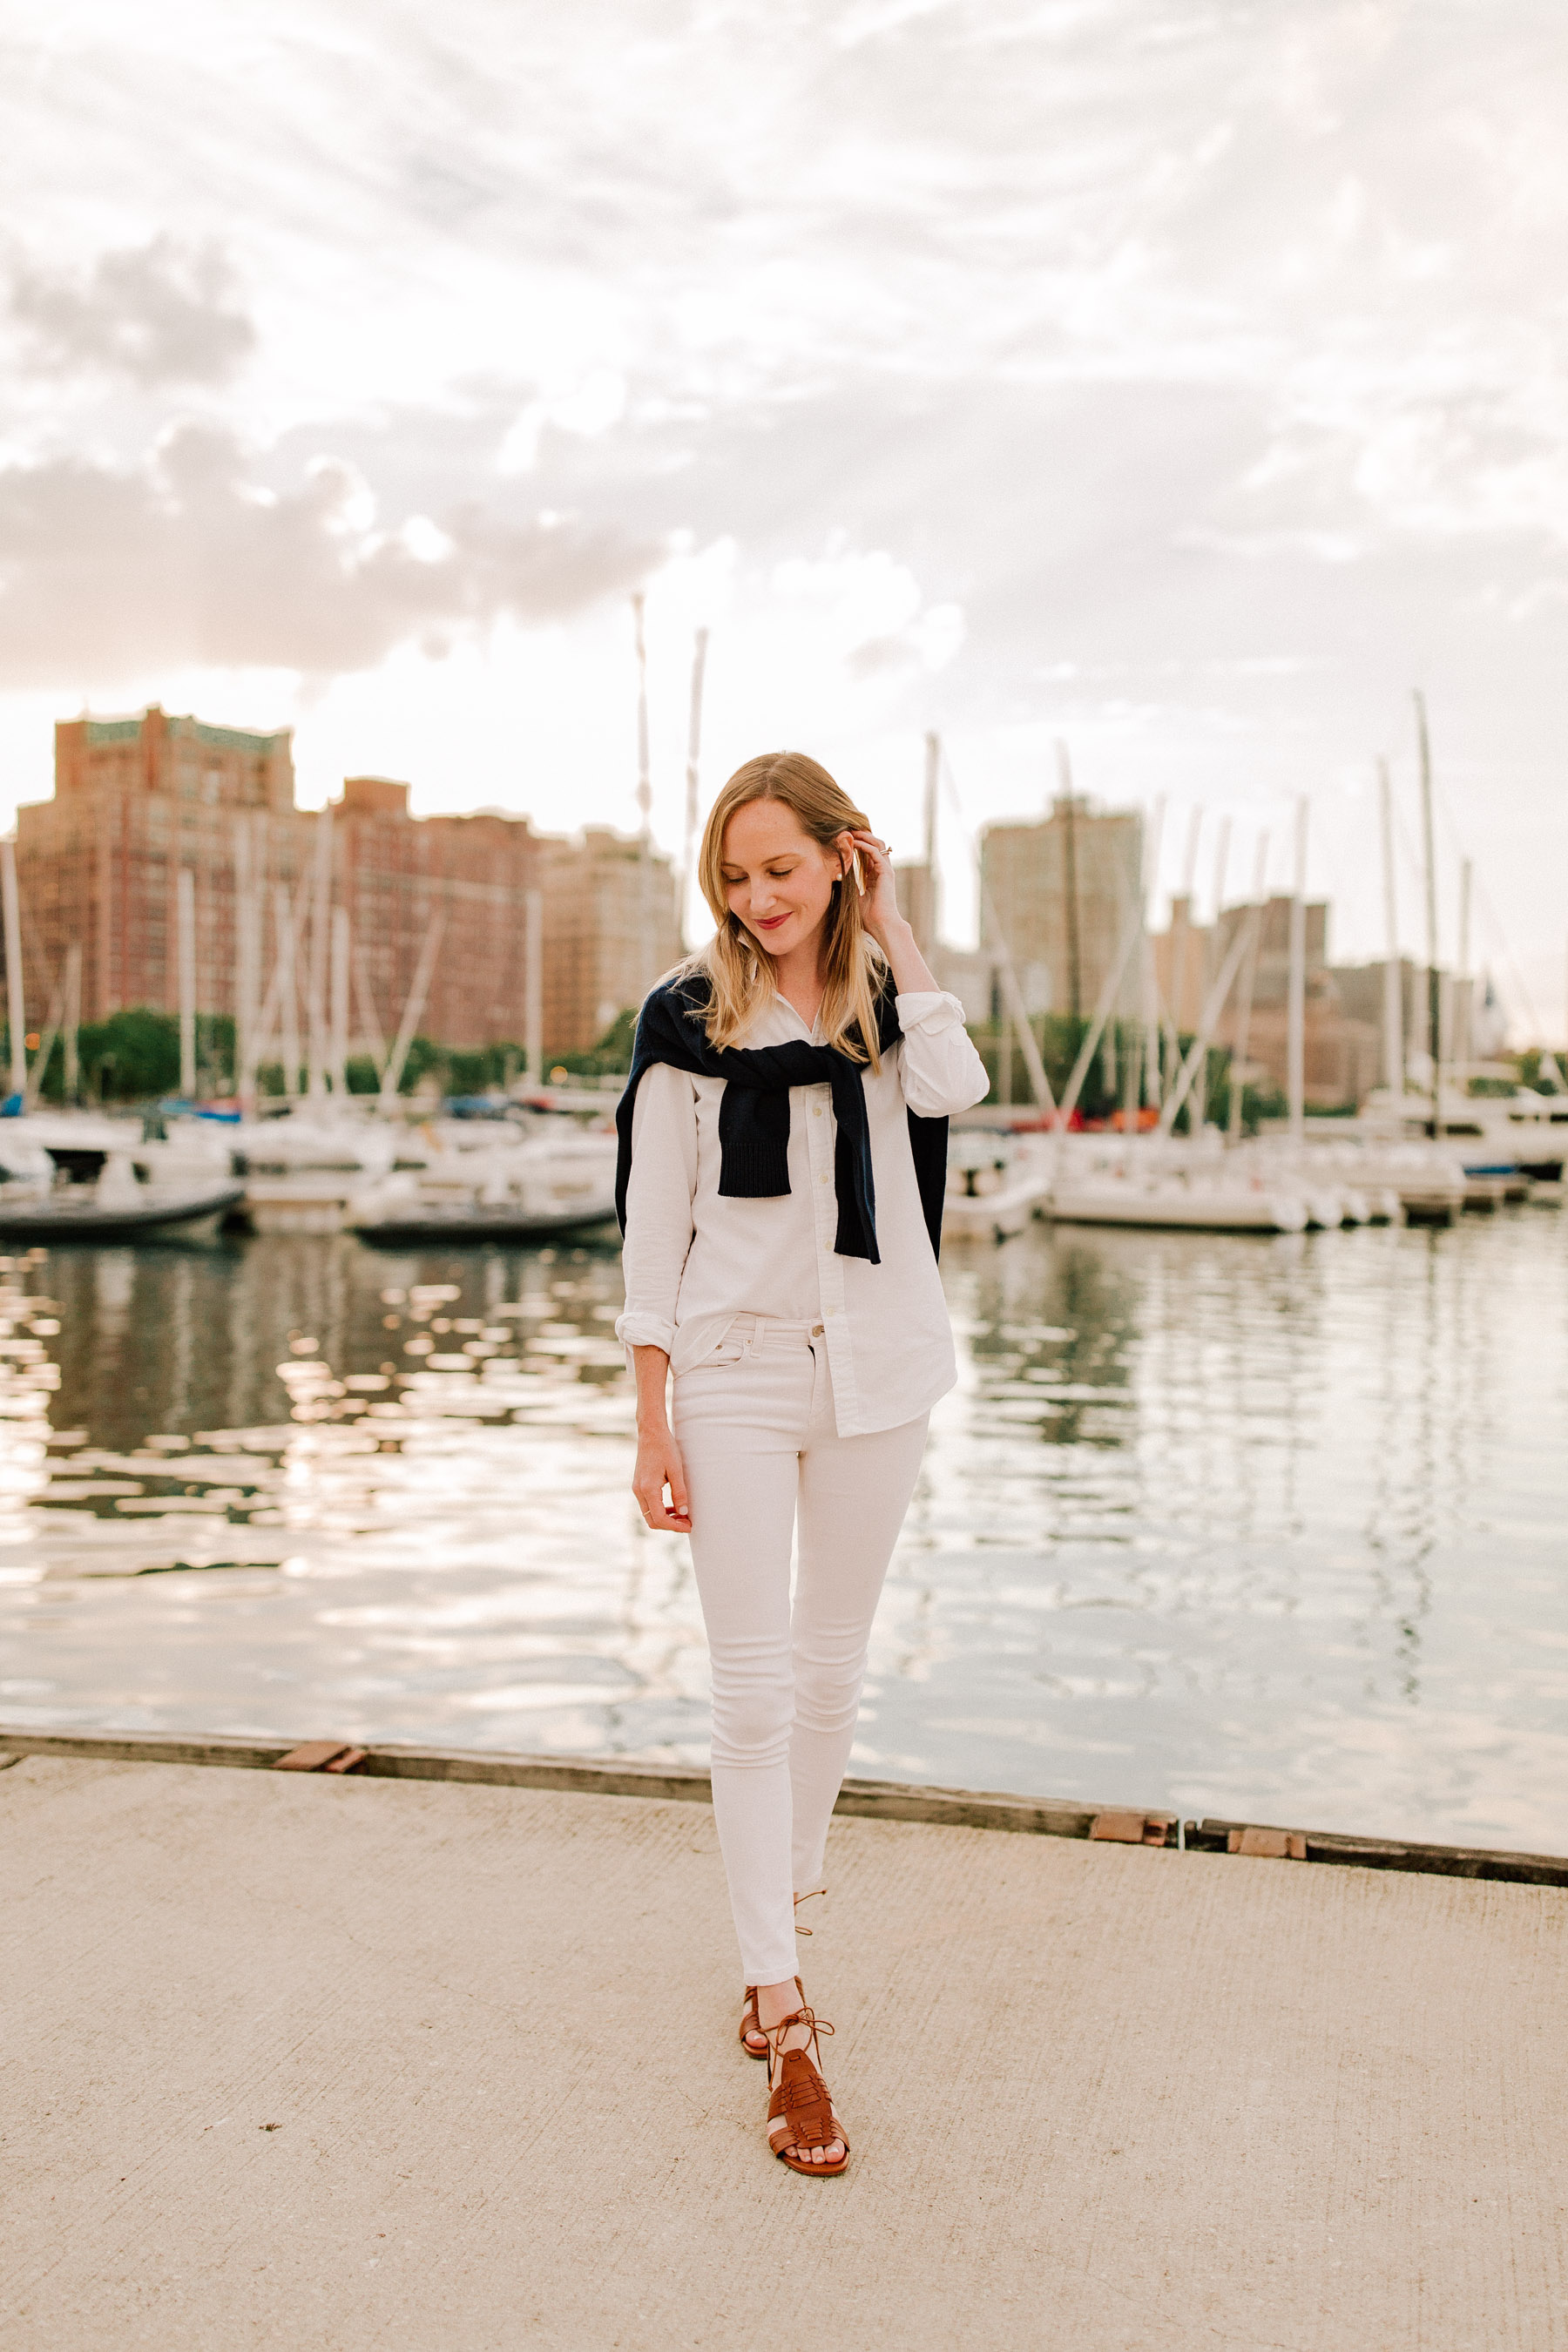 Boat Cotton Rollneck Sweater / Knit Cotton Oxford Shirt / Leather Vachetta Sandals / Leather Lennox Bag  - Kelly in the city